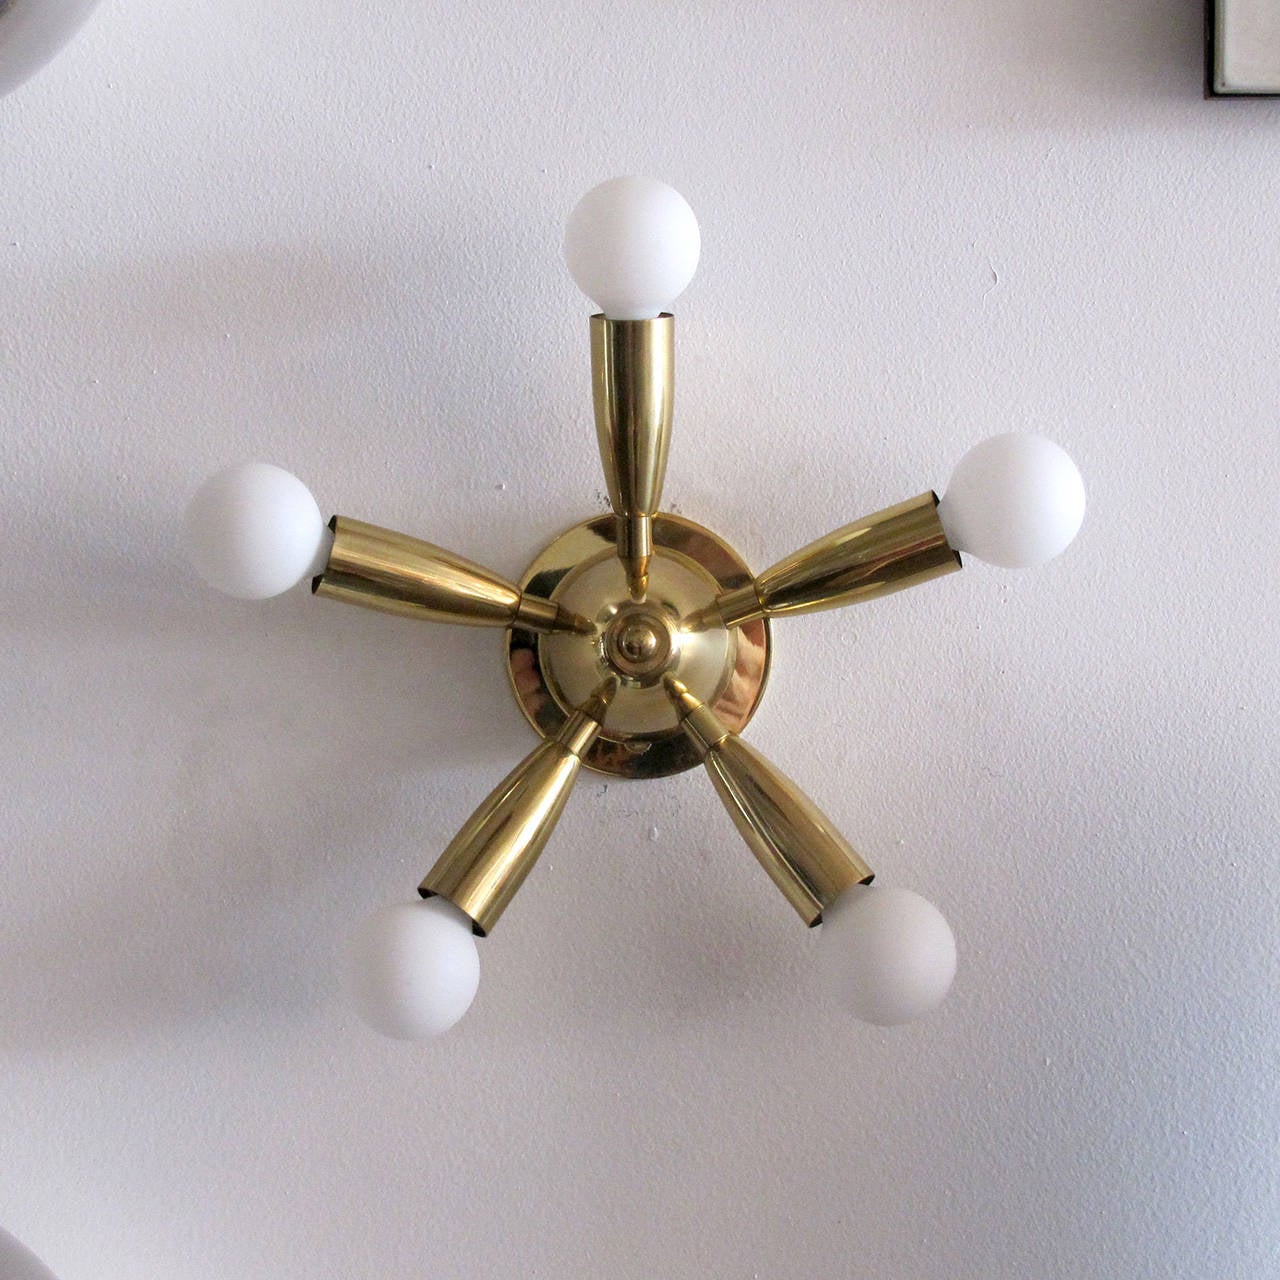 wonderful petite 5-arm sputnik brass sconce, can be used as wall or ceiling flush mount fixture